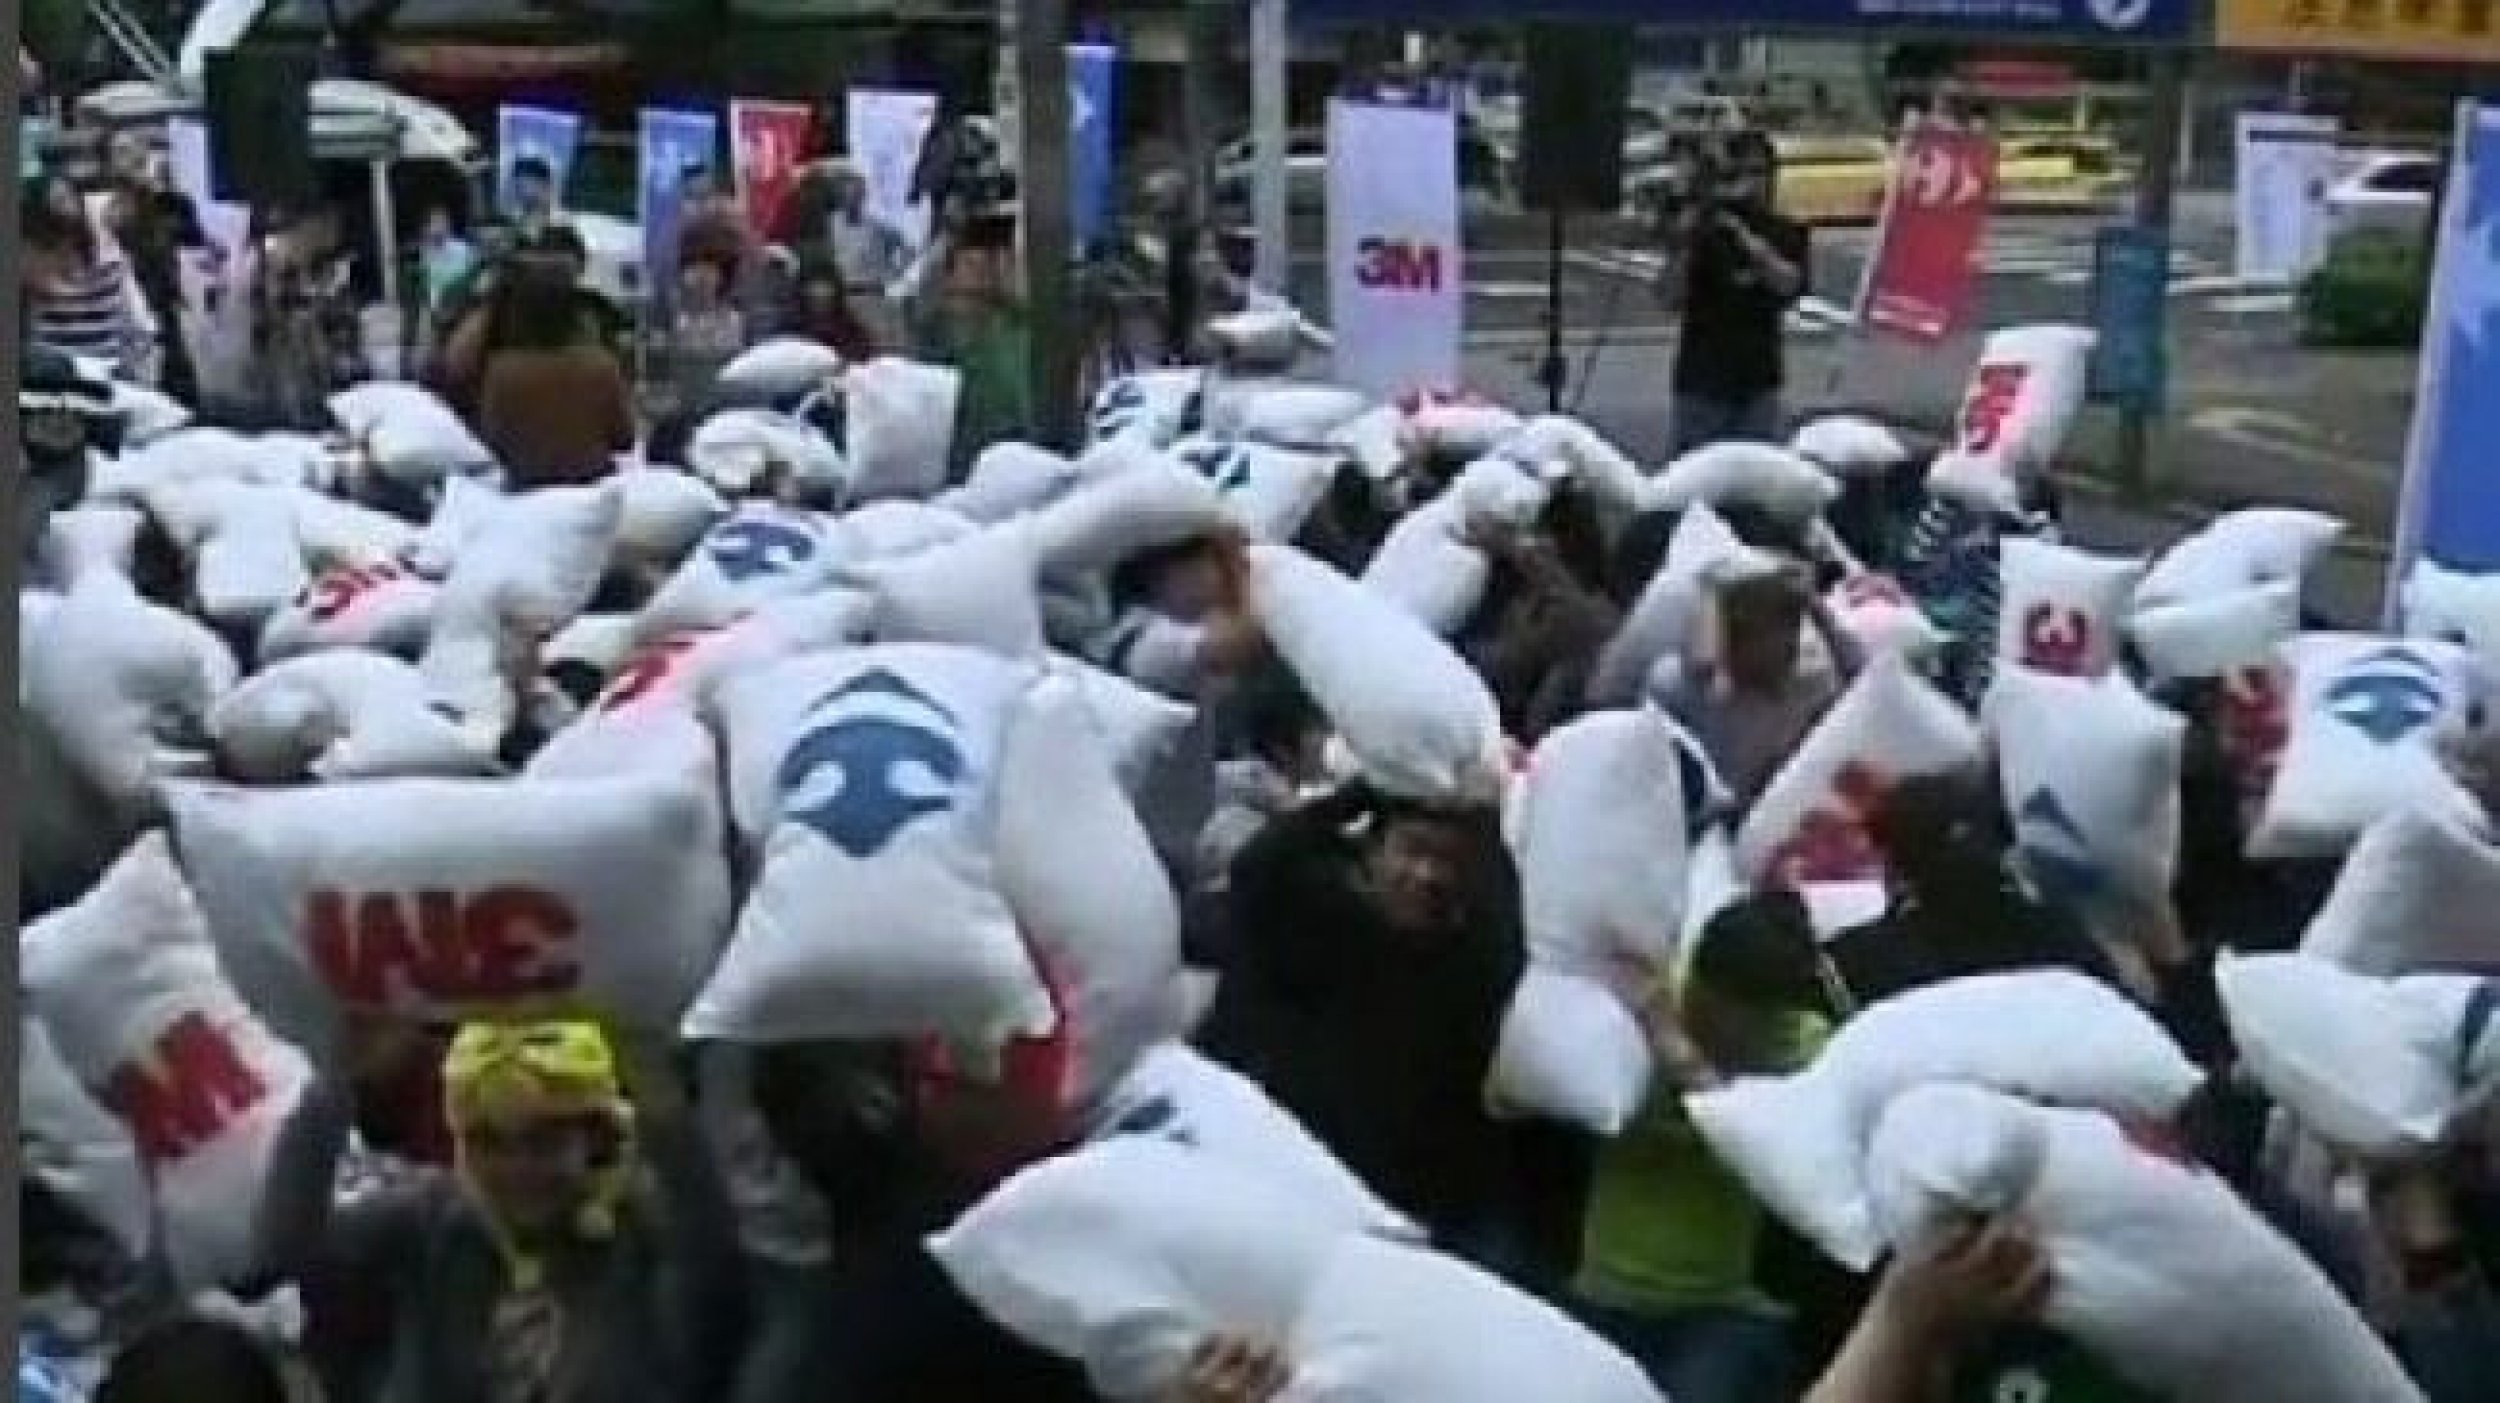 Feathers Fly in Street Marking International Pillow Fight Day